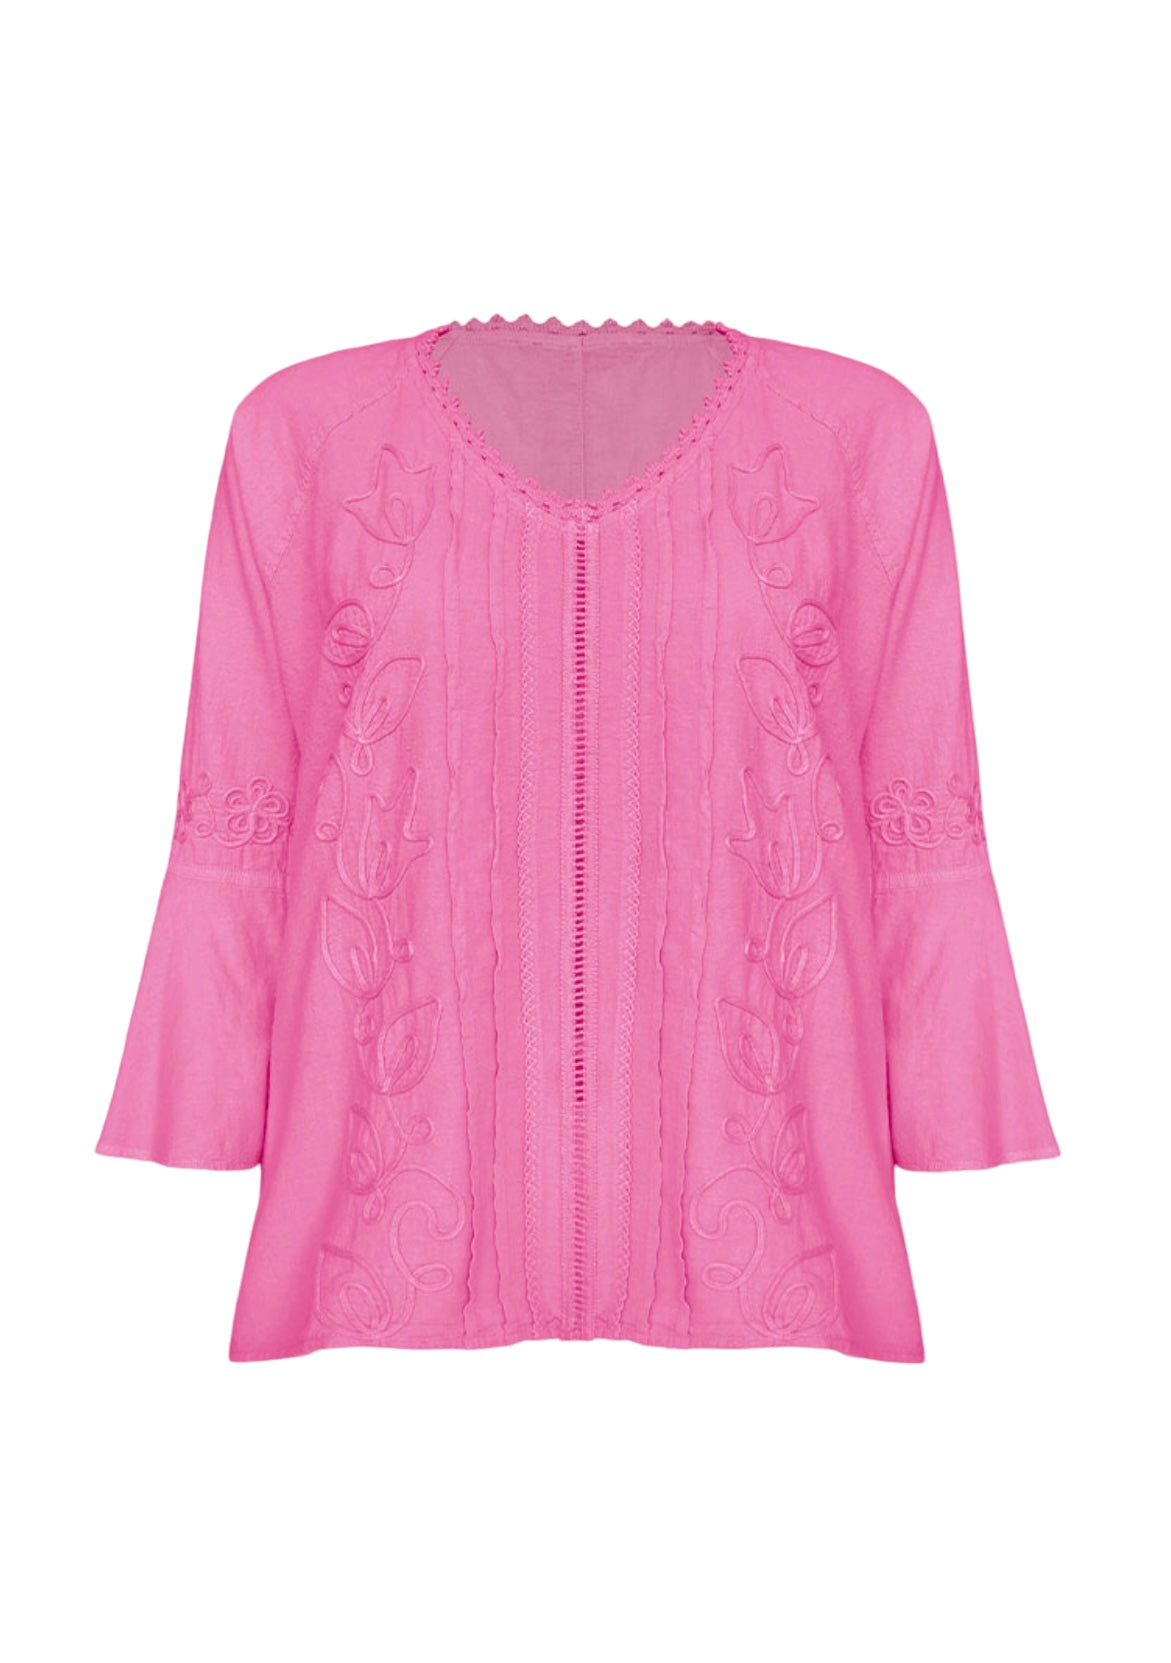 Cotton 3/4 Flounce Sleeve Top in Hot Pink at ooh la la! in Grapevine TX 76051